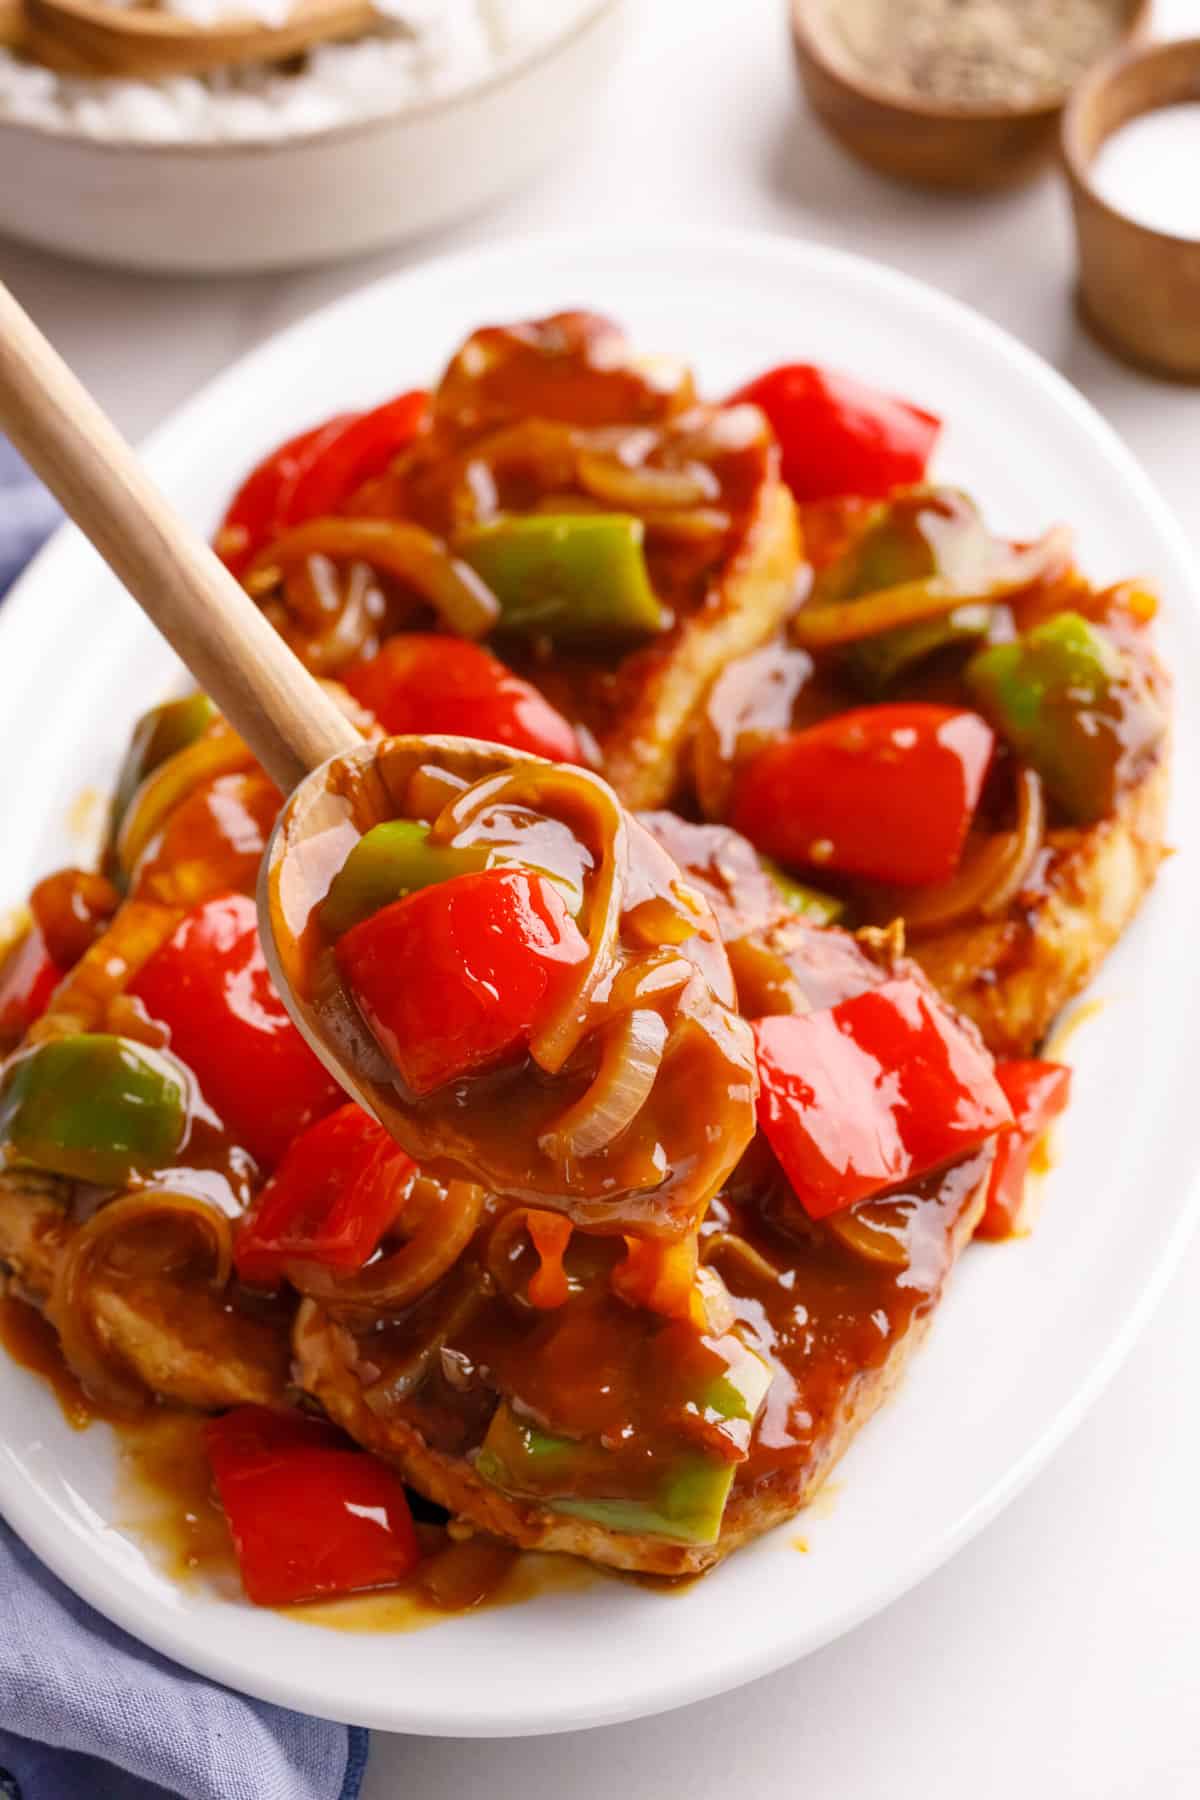 close up image of a plate of sweet and sour pork chops